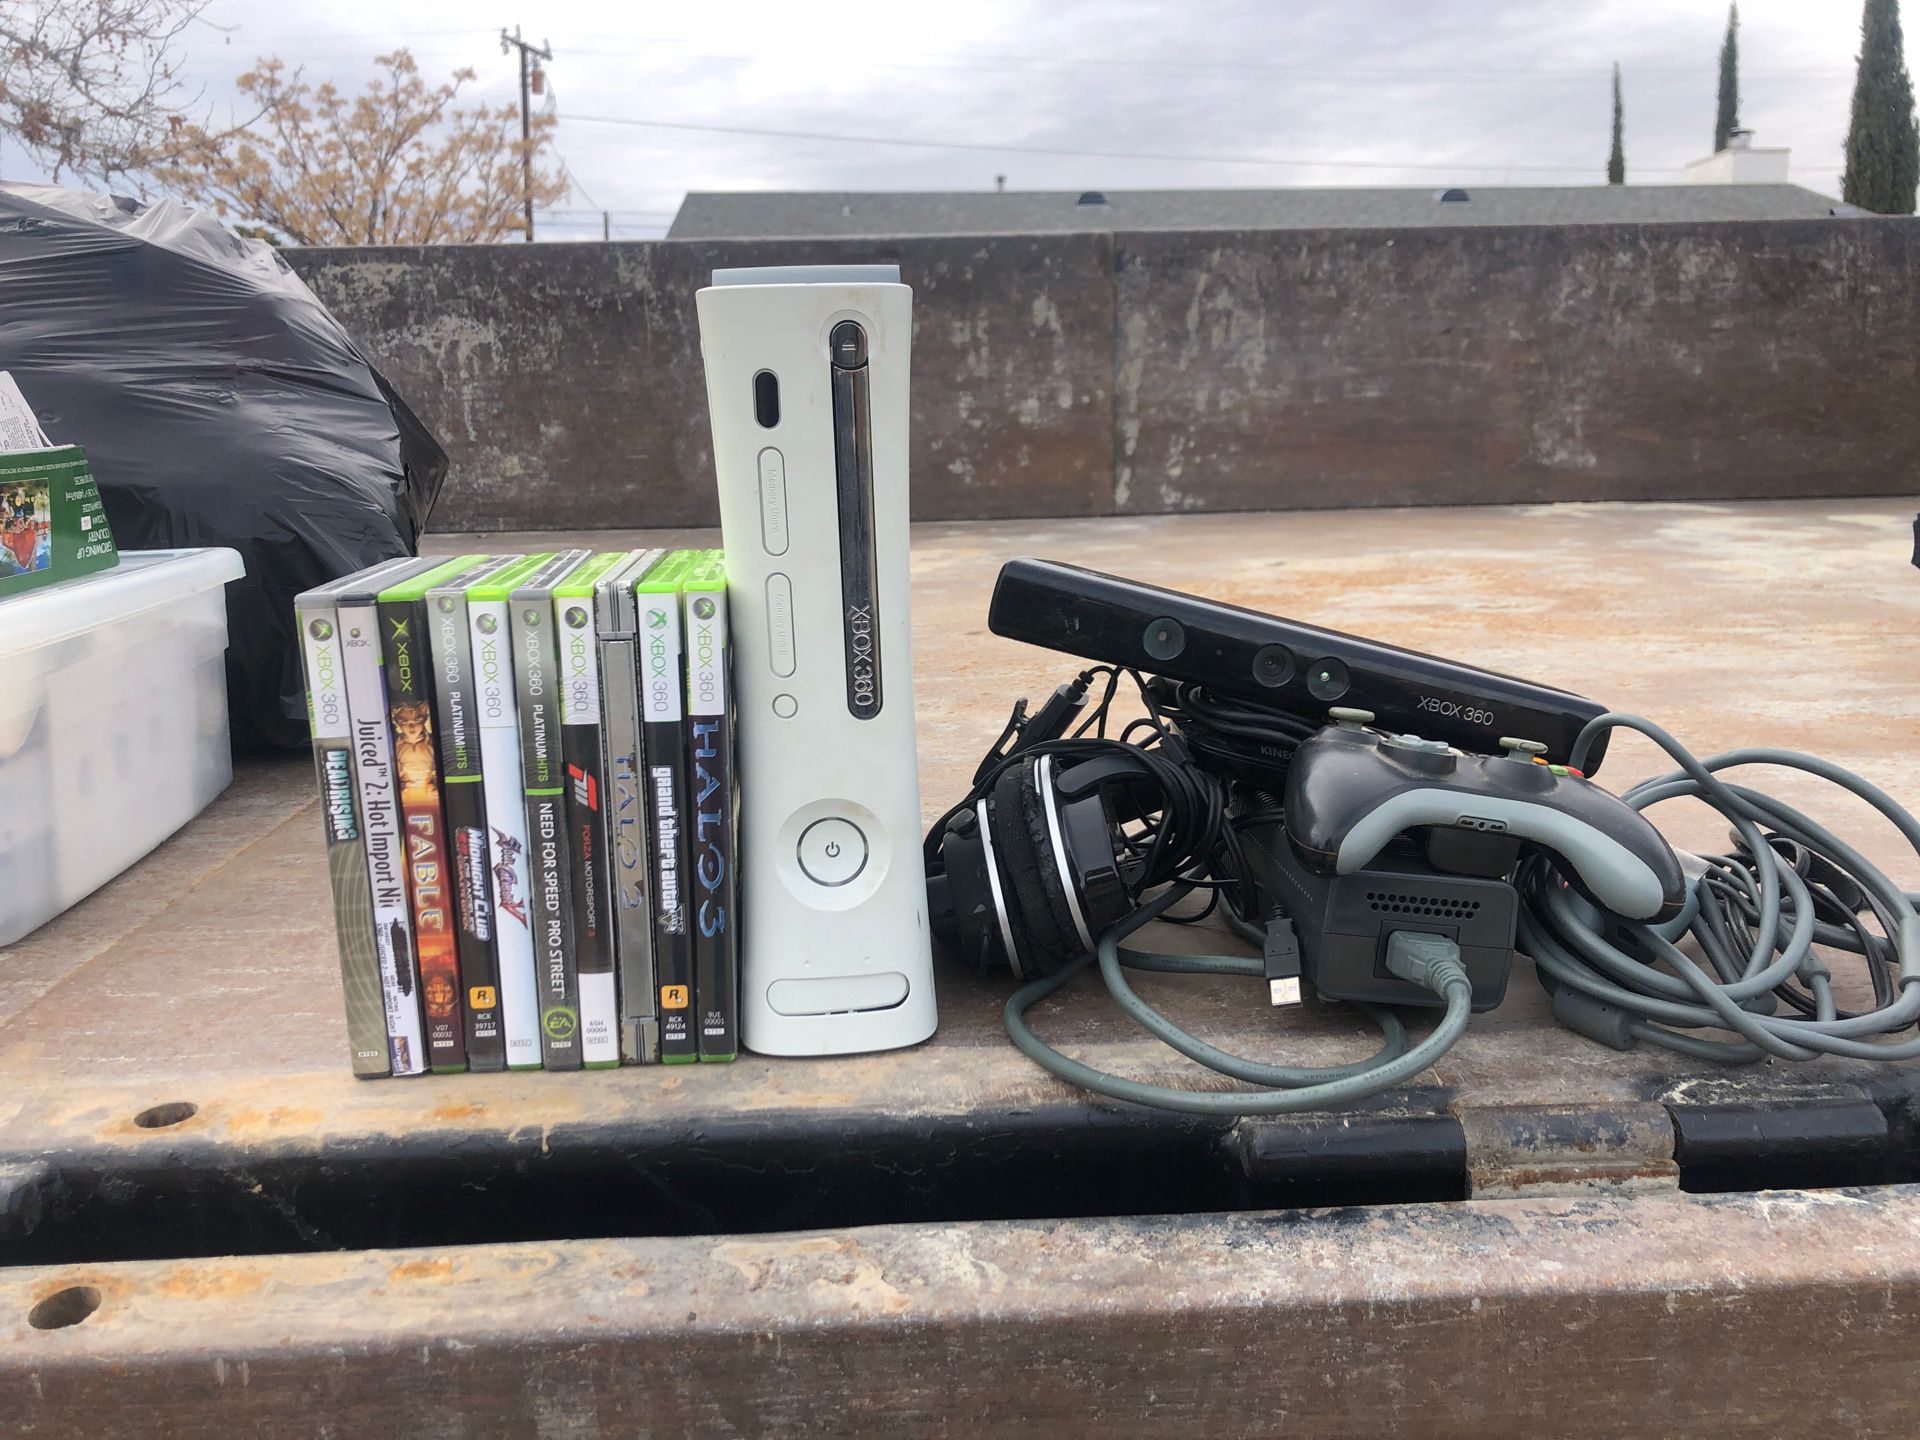 Xbox 360 with games